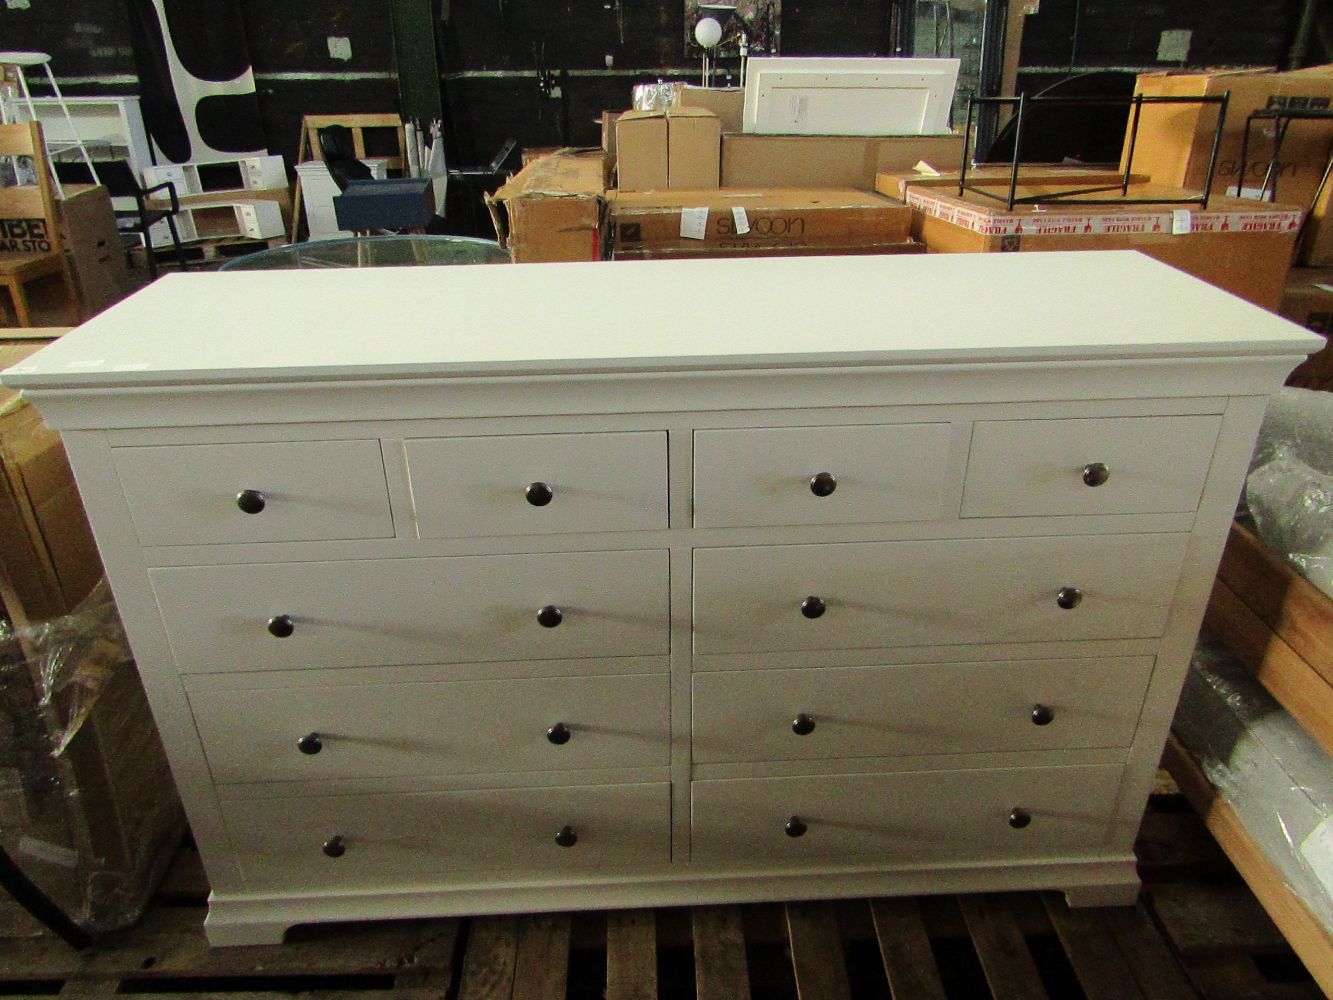 New Fresh Load of Furniture From Brands Such As Swoon, Heals, Oak Furnitureland, Chelsom & More!